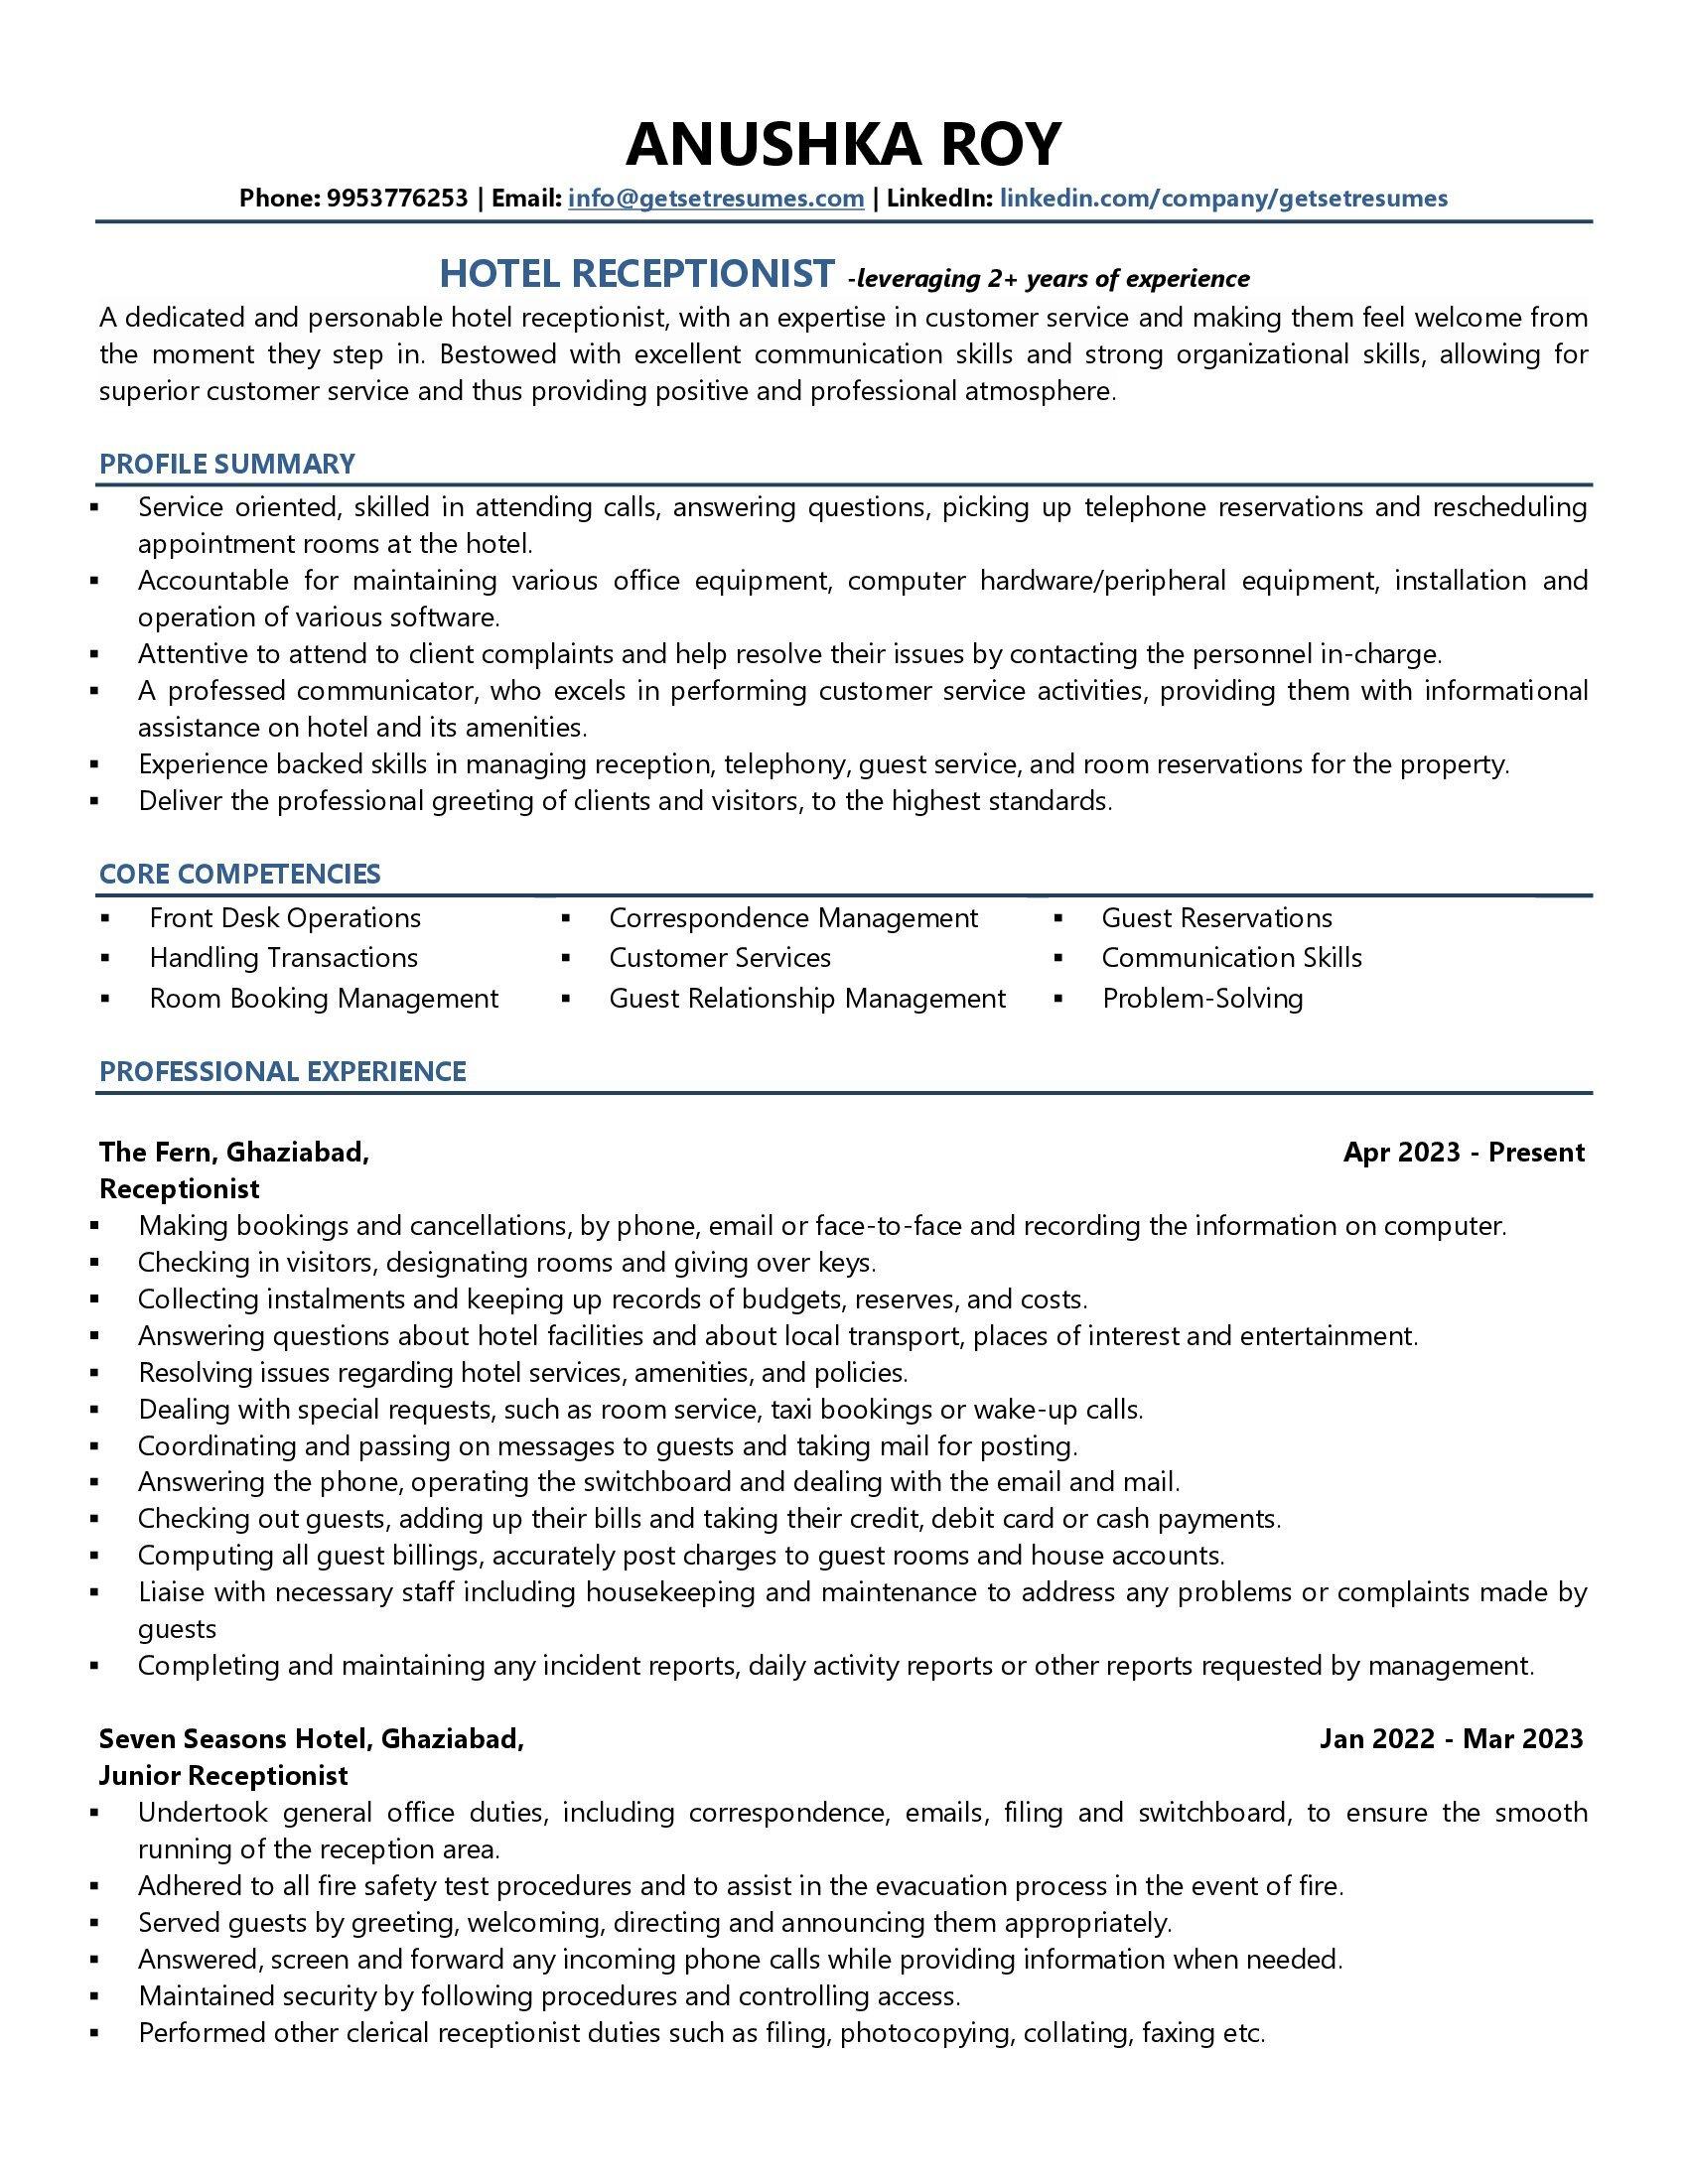 Hotel Receptionist - Resume Example & Template